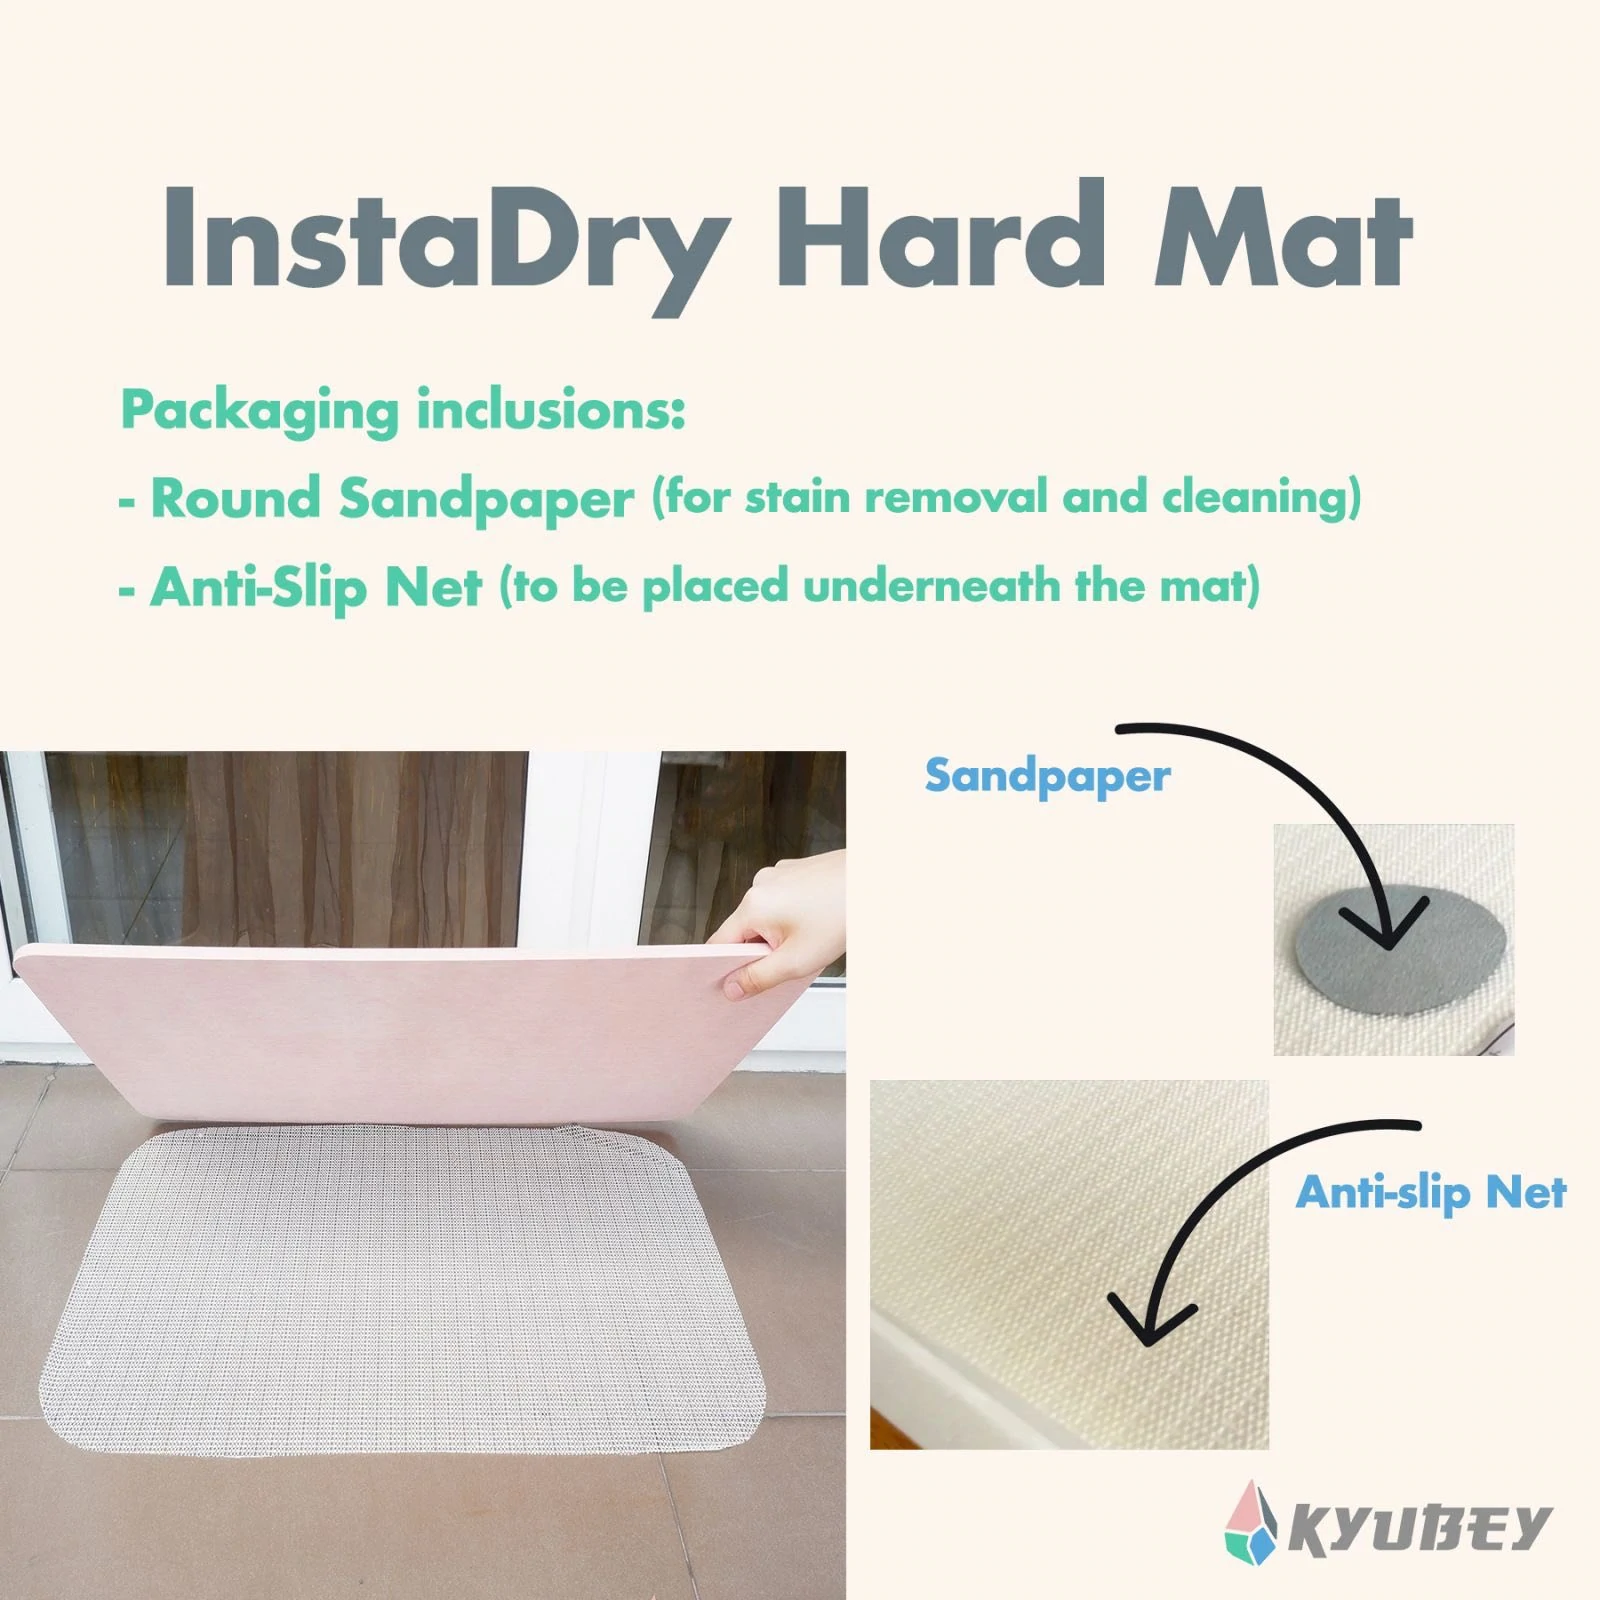 Kyubey Instadry Hard Mat | The Nest Attachment Parenting Hub